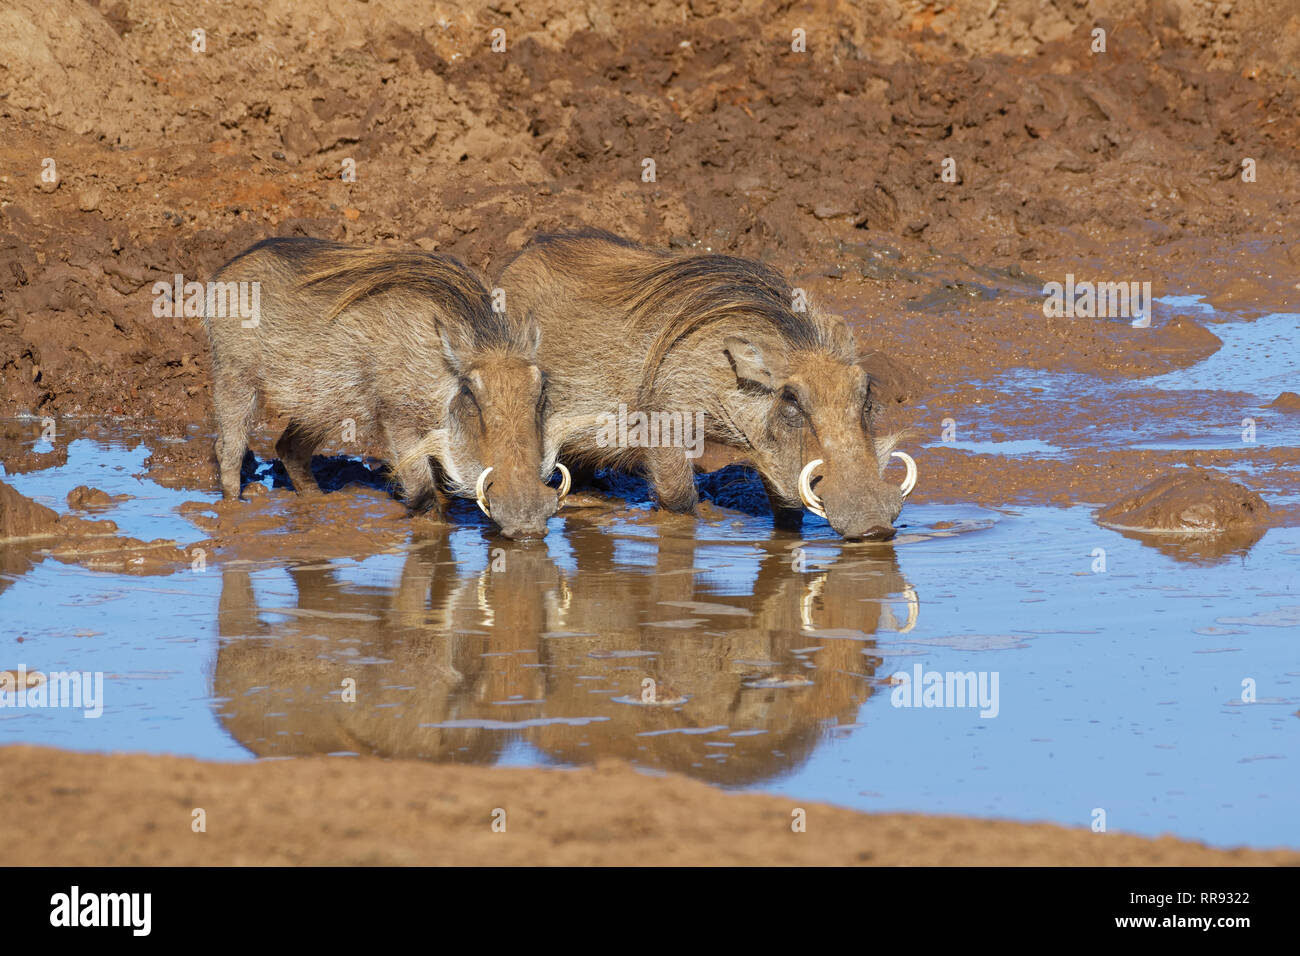 Common warthogs (Phacochoerus africanus), two adults in muddy water, drinking at a waterhole, Addo National Park, Eastern Cape, South Africa, Africa Stock Photo